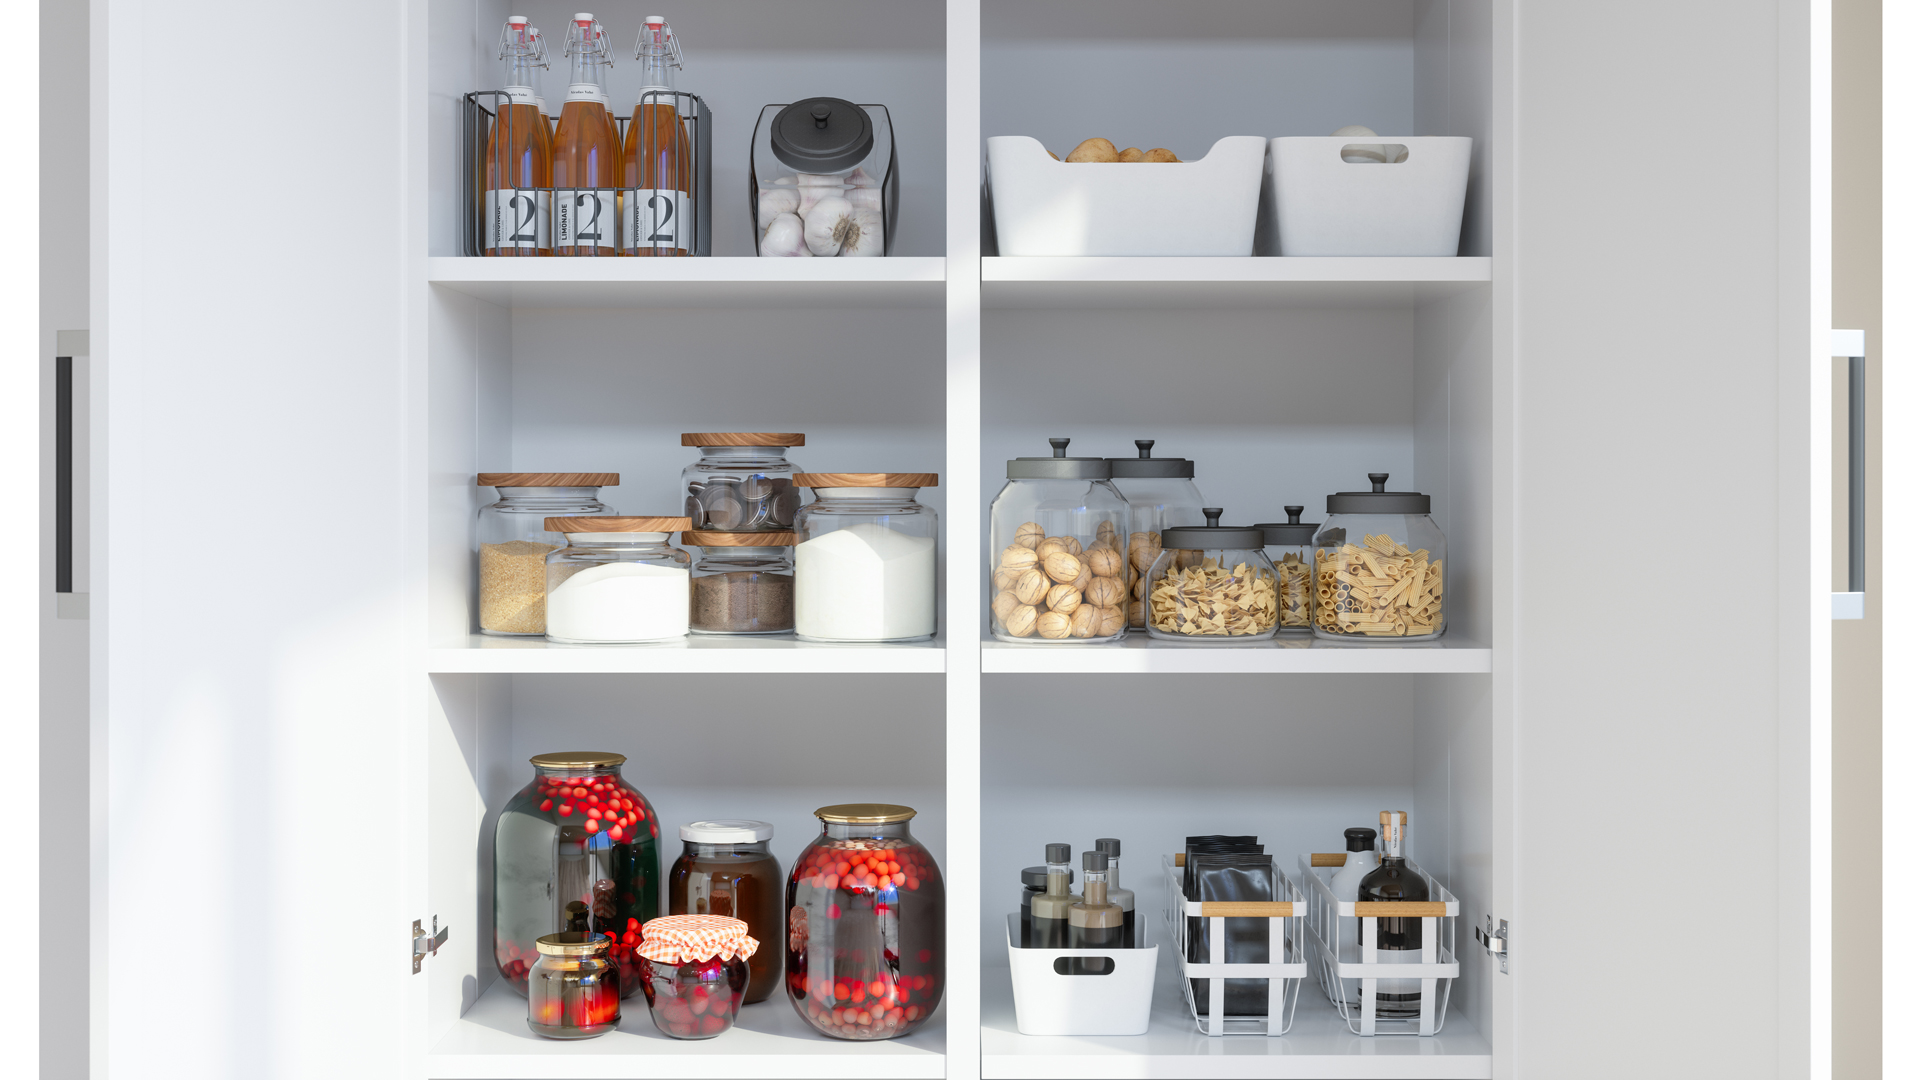 Pantry organized by food groups in jars and baskets on different shelves showing how to organize a pantry more efficiently